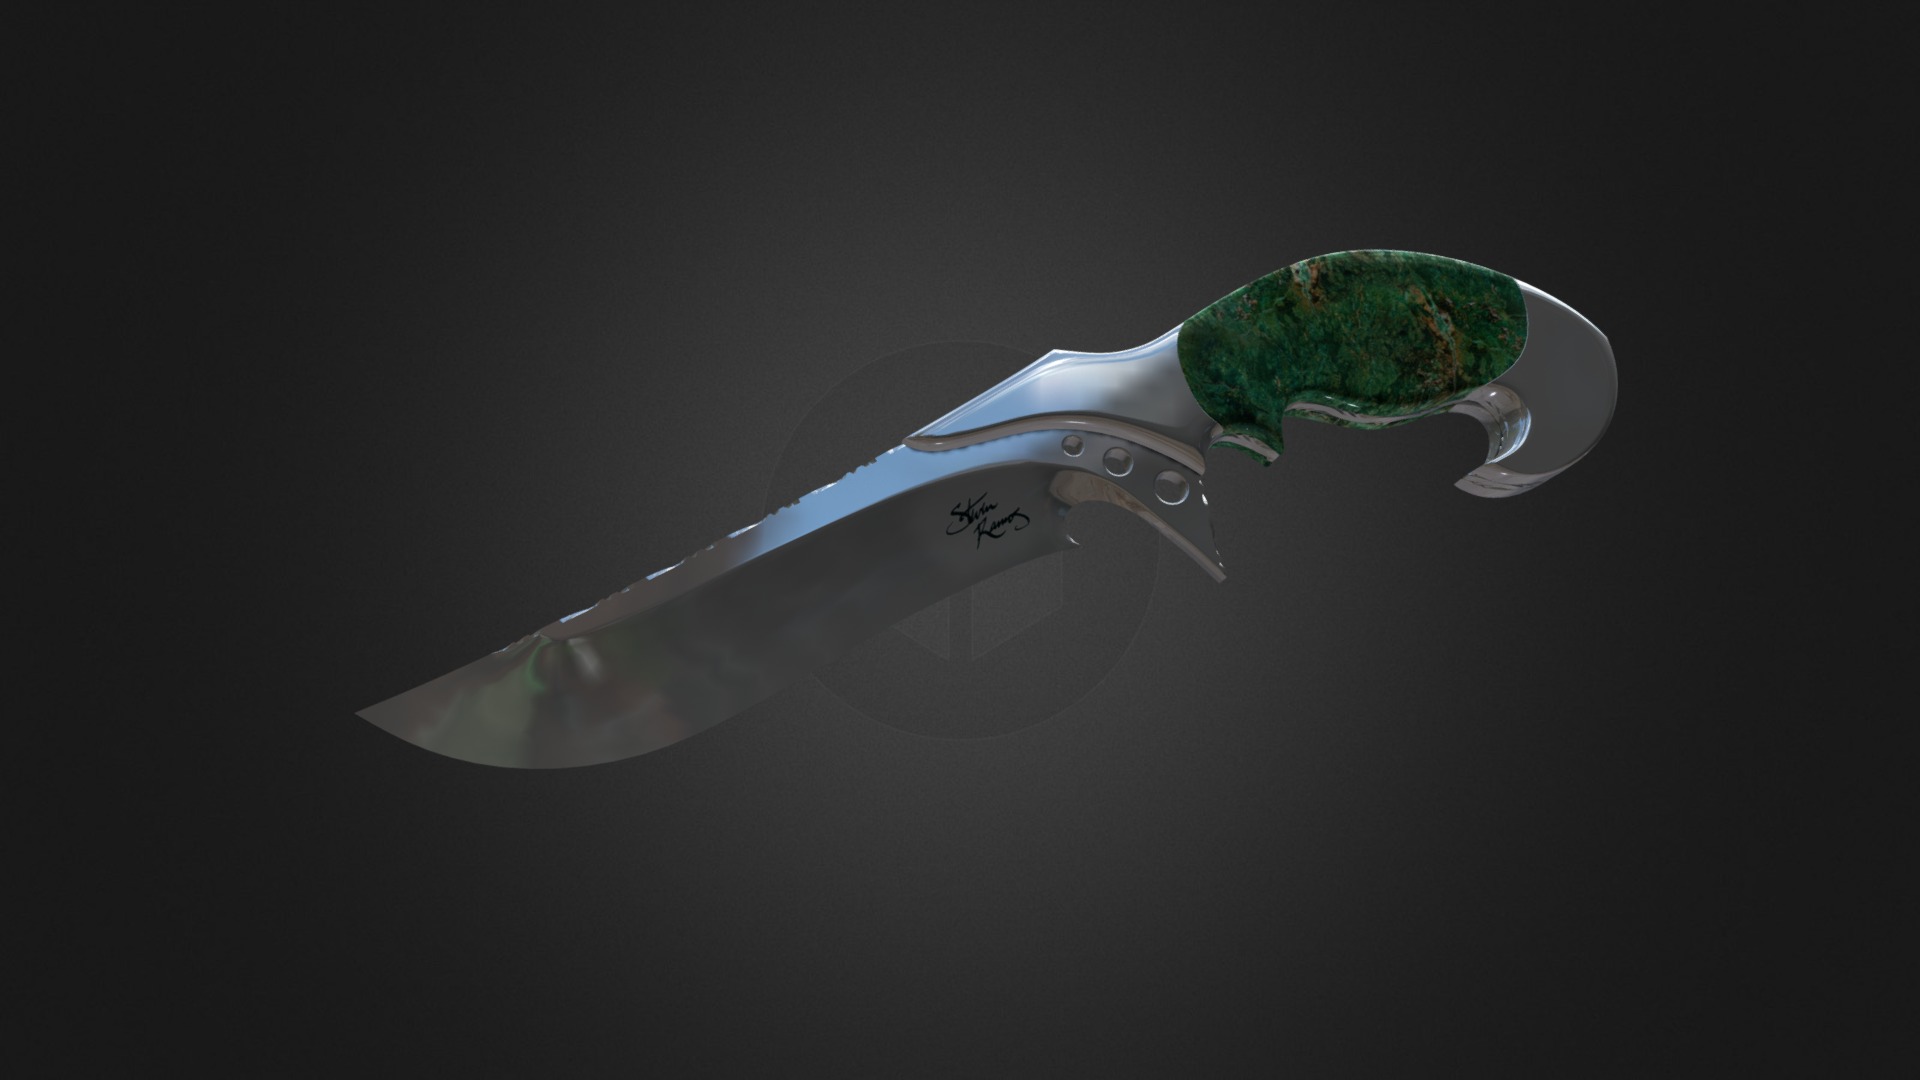 3D model Cygnus - This is a 3D model of the Cygnus. The 3D model is about a spoon with a green substance.